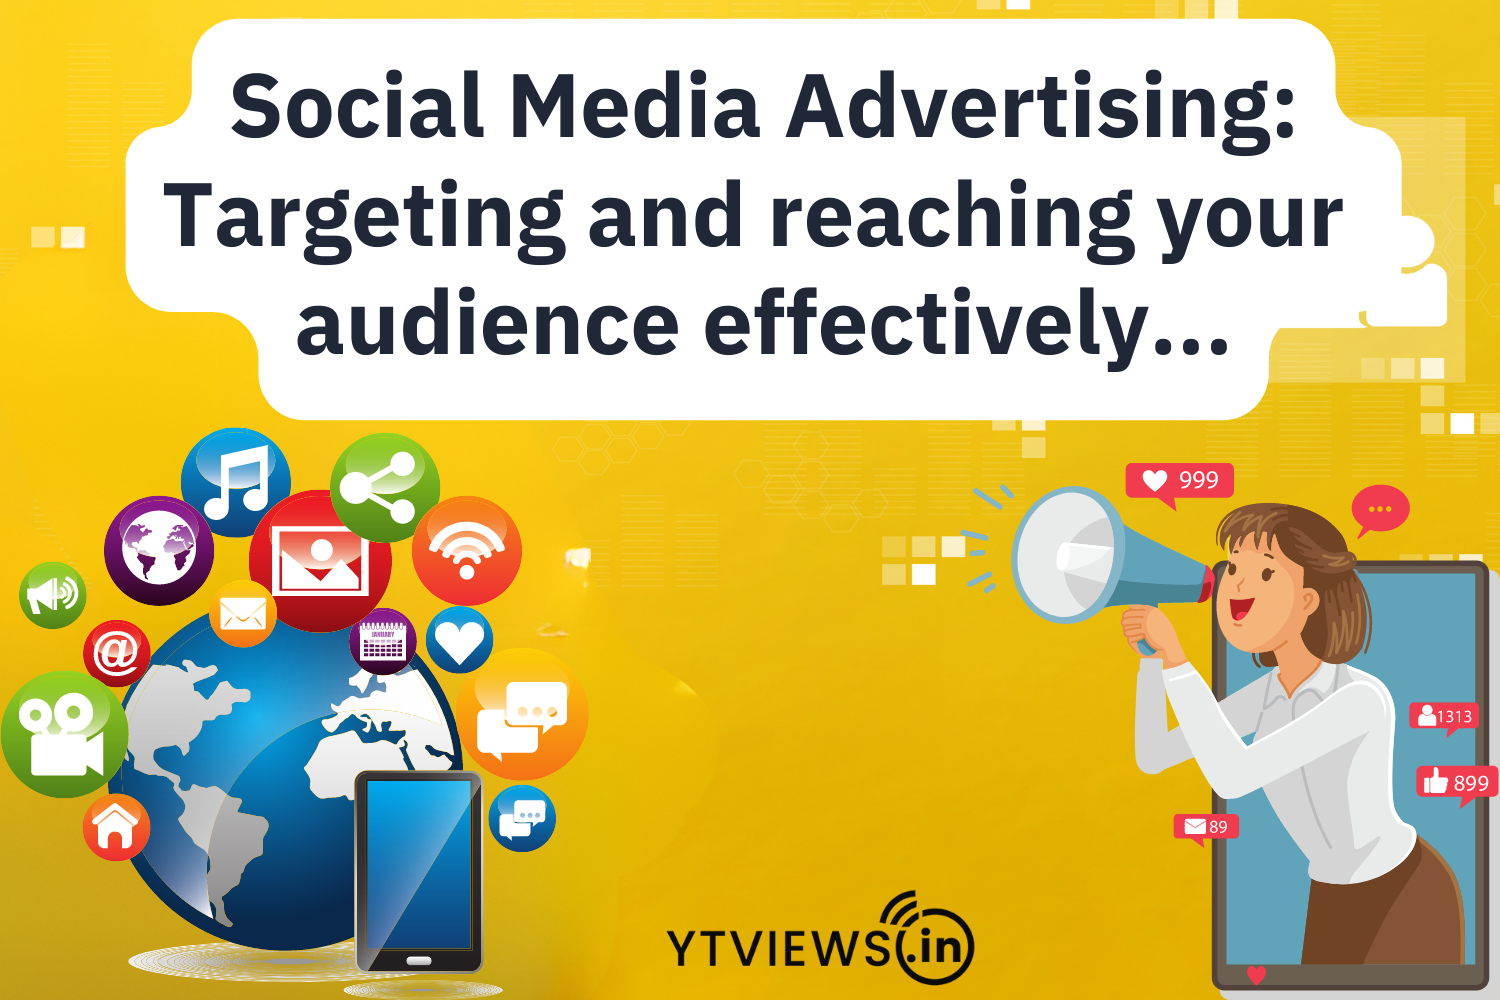 Social Media Advertising: Targeting and reaching your audience effectively.